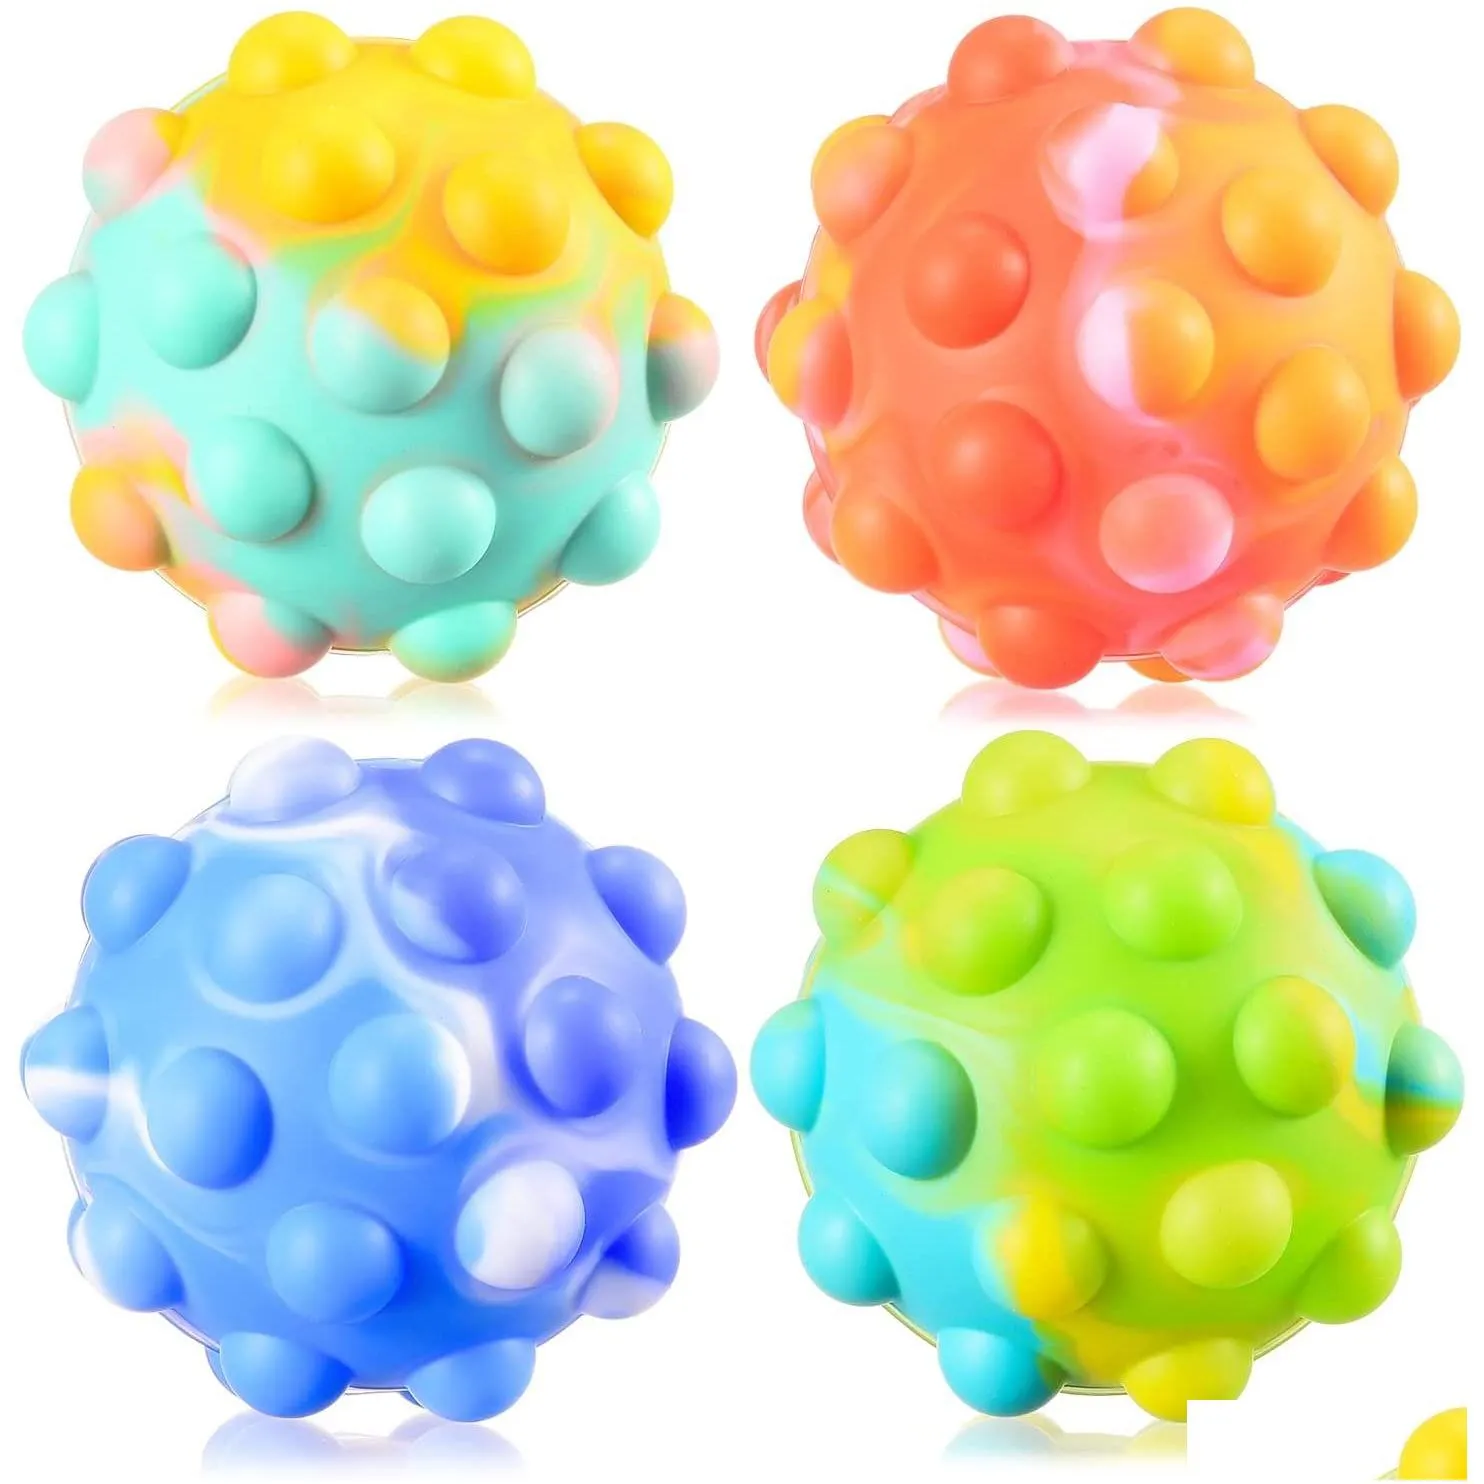 anti pressure popper sensory toys 3d squeeze  ball its fidget toy bath toys stress balls for kids adults over 1 years